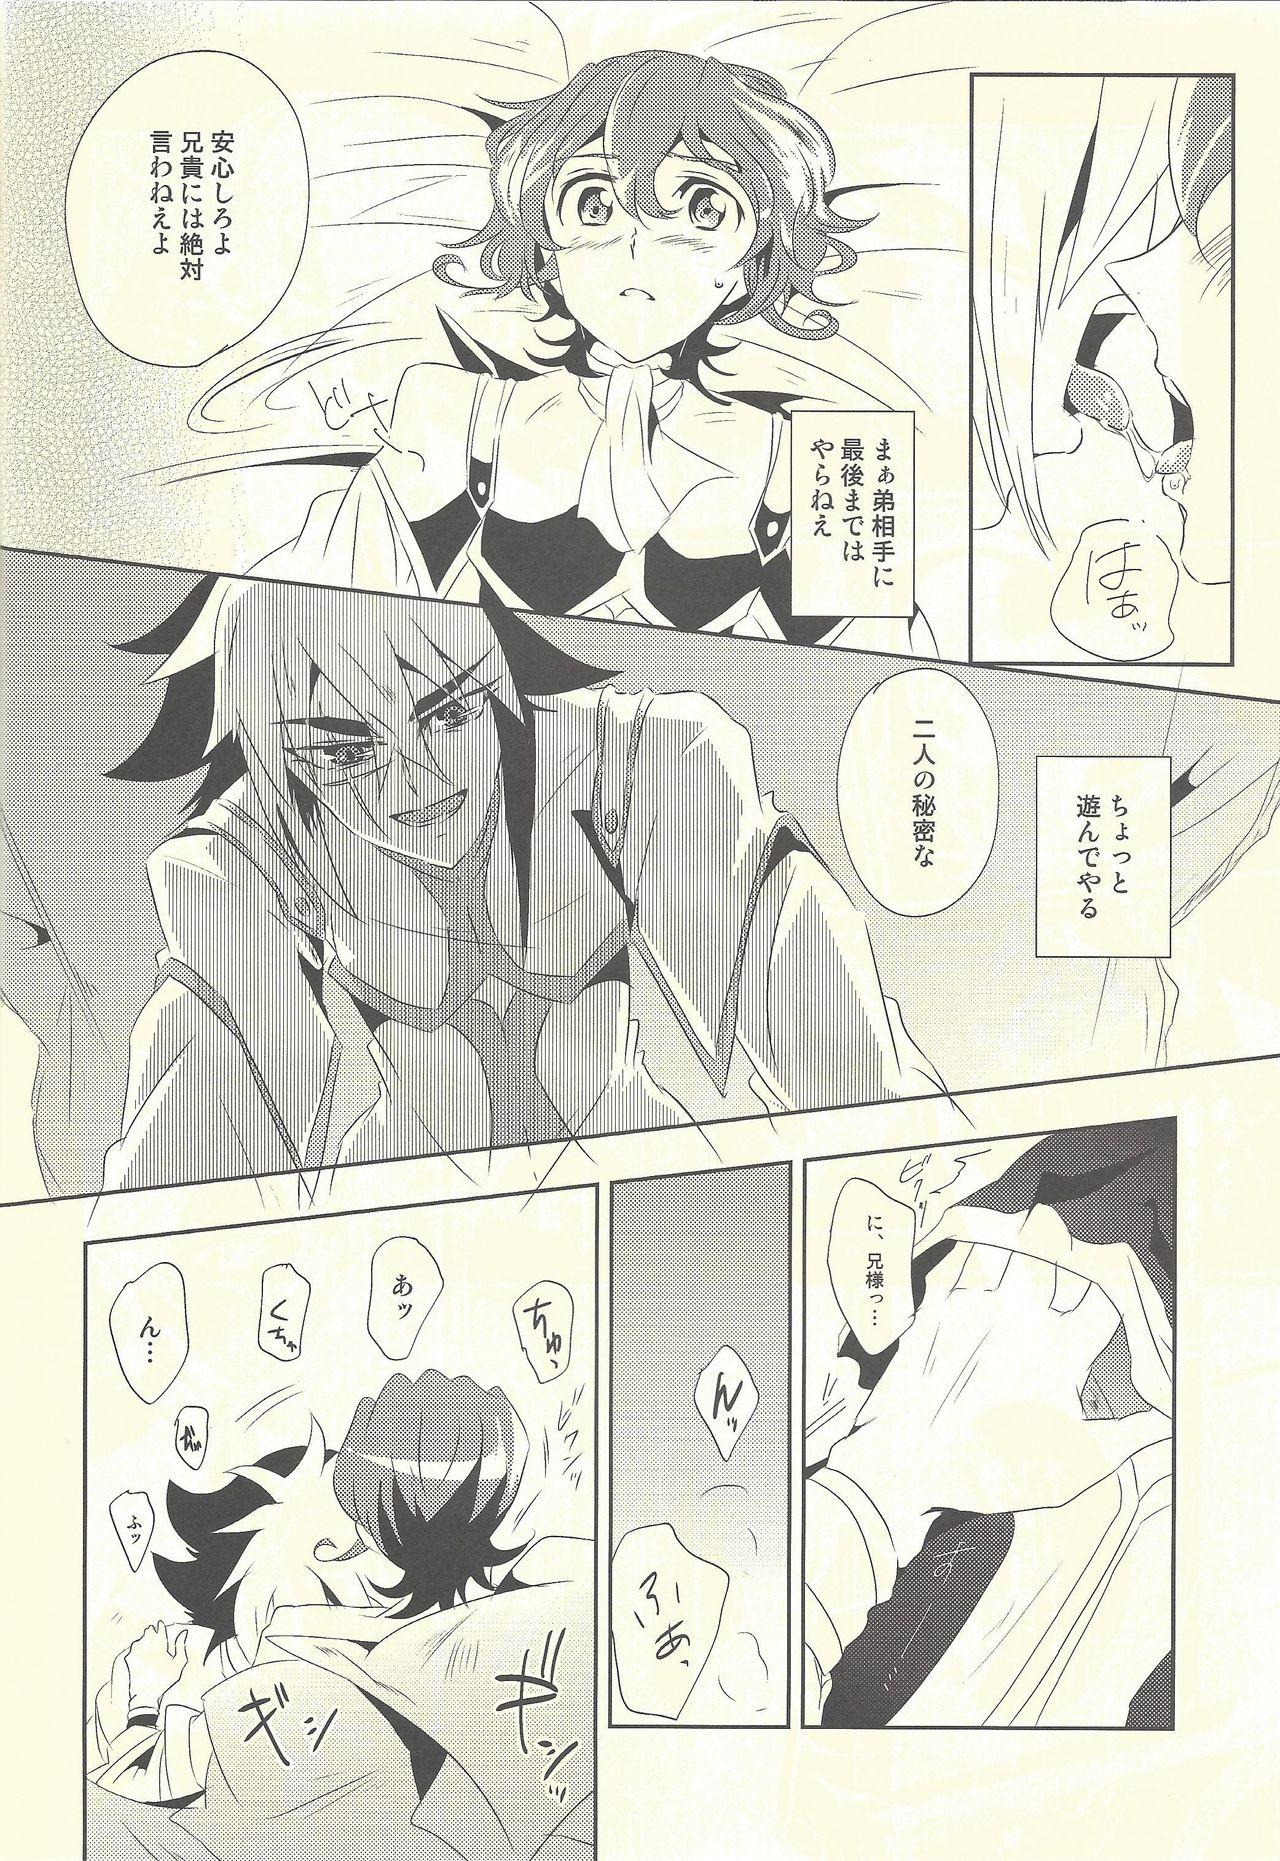 Leaked Hime-goto - Yu-gi-oh zexal Stripping - Page 11